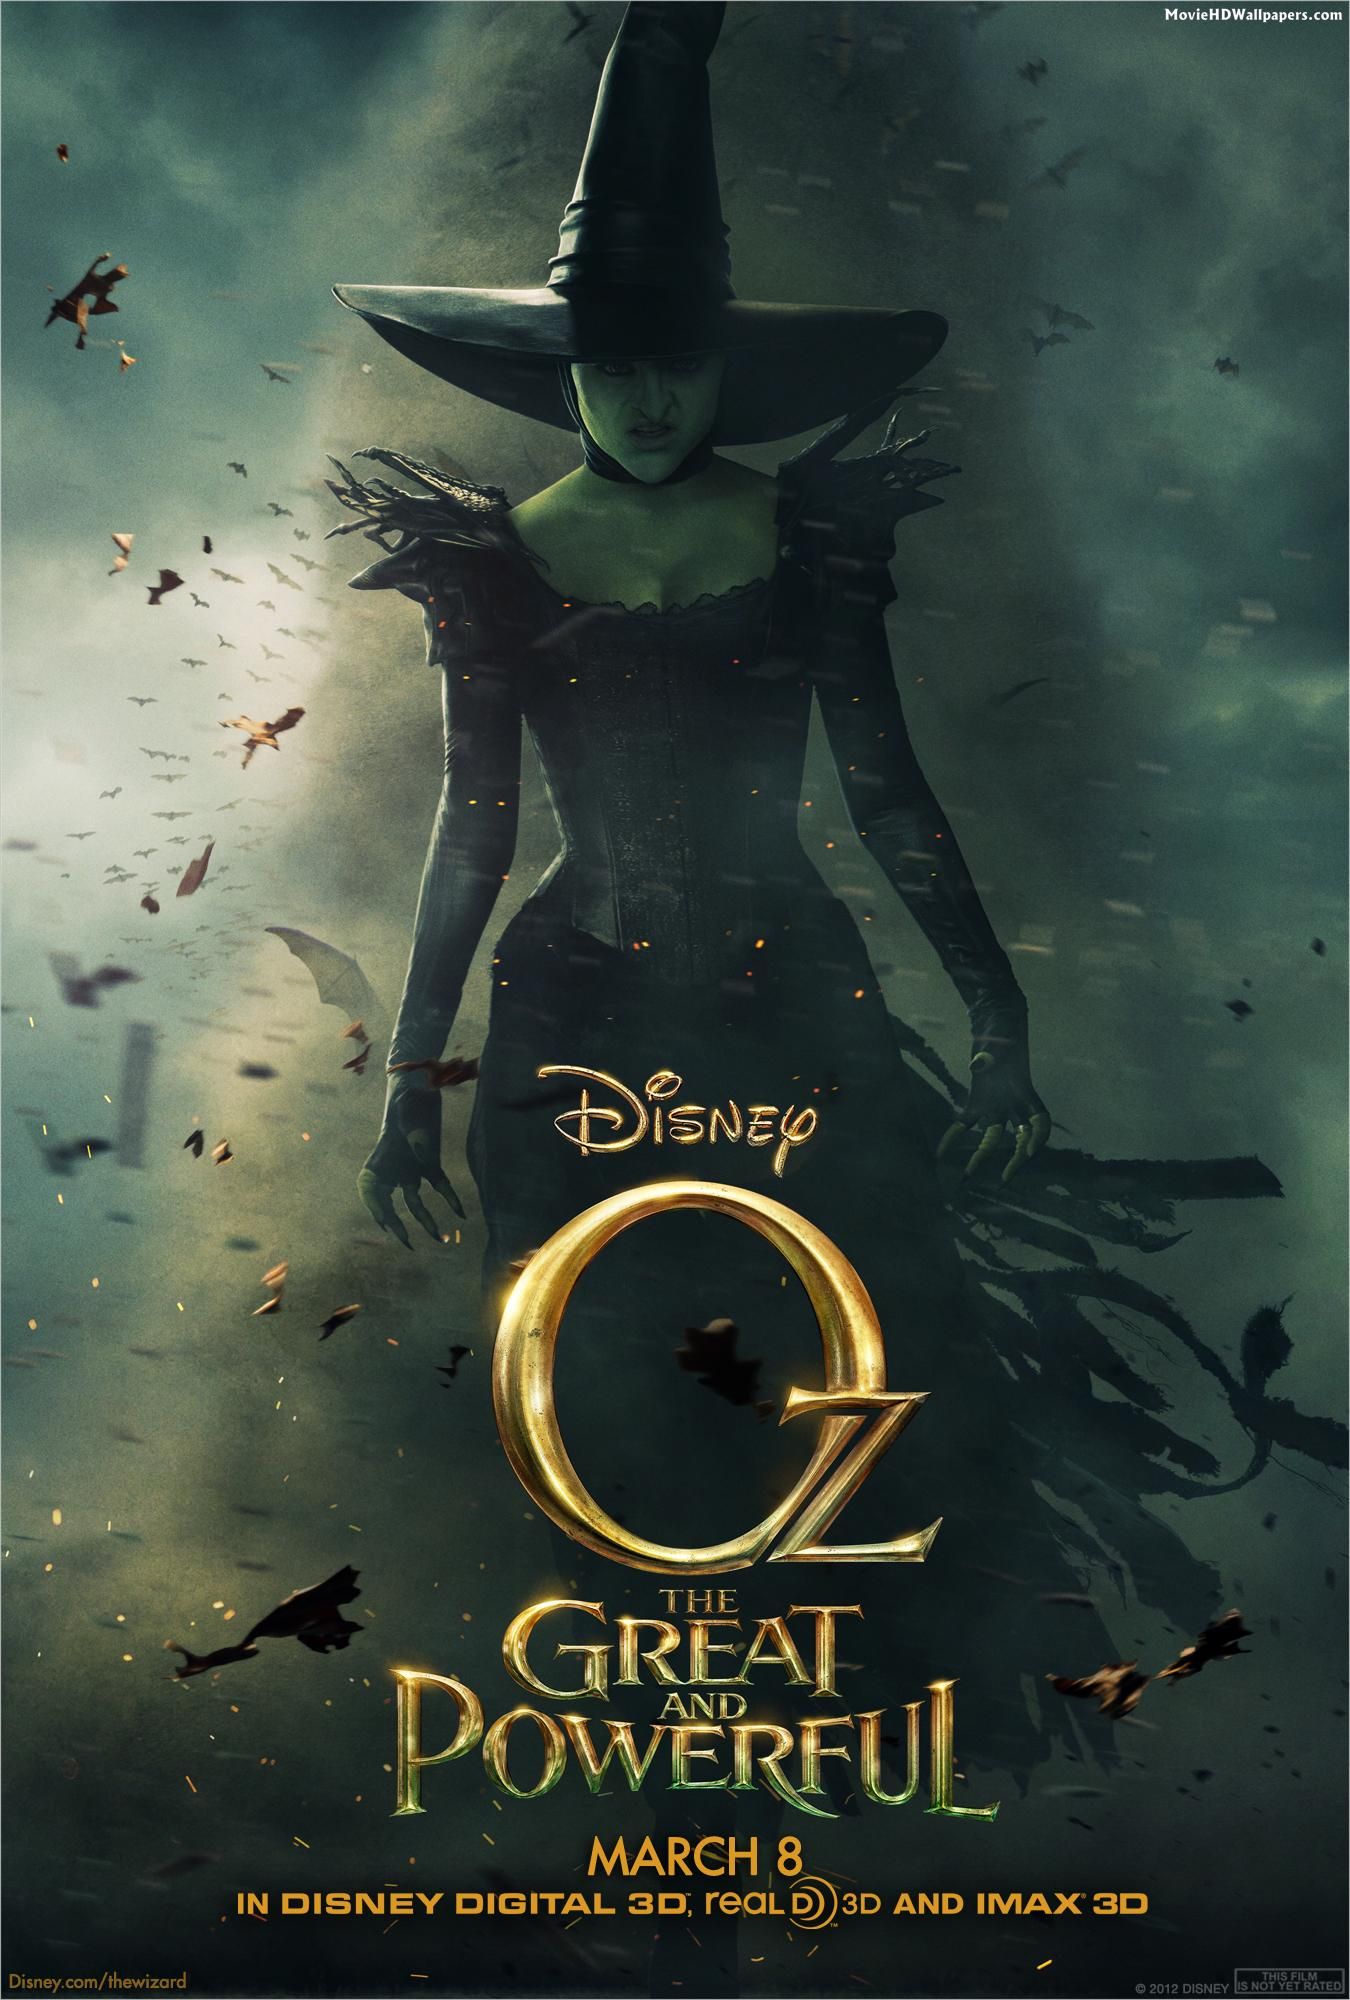 Oz the Great and Powerful 2013 .moviehdwallpaper.com